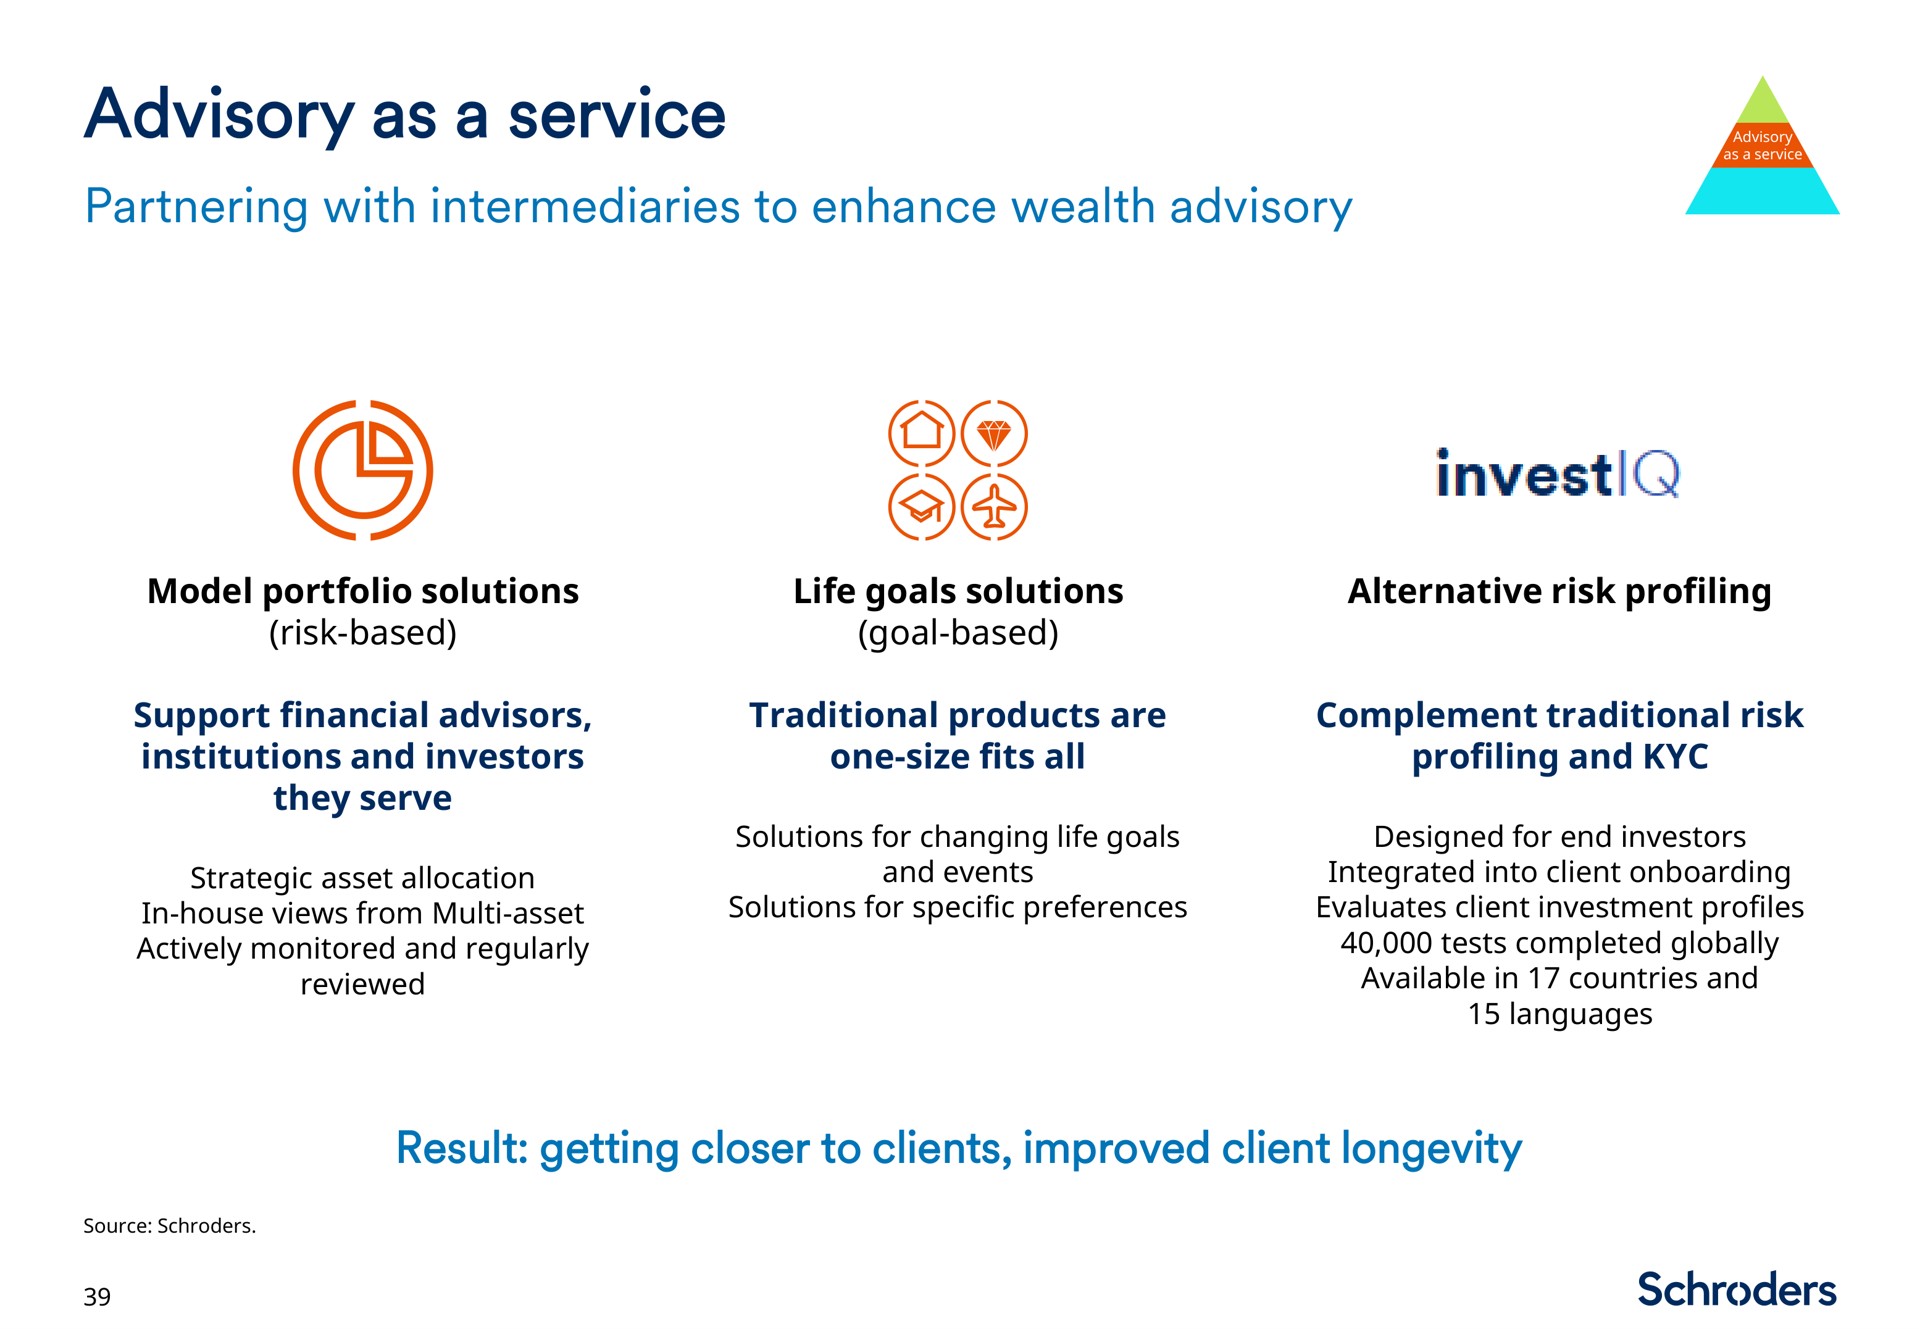 advisory as a service invest | Schroders